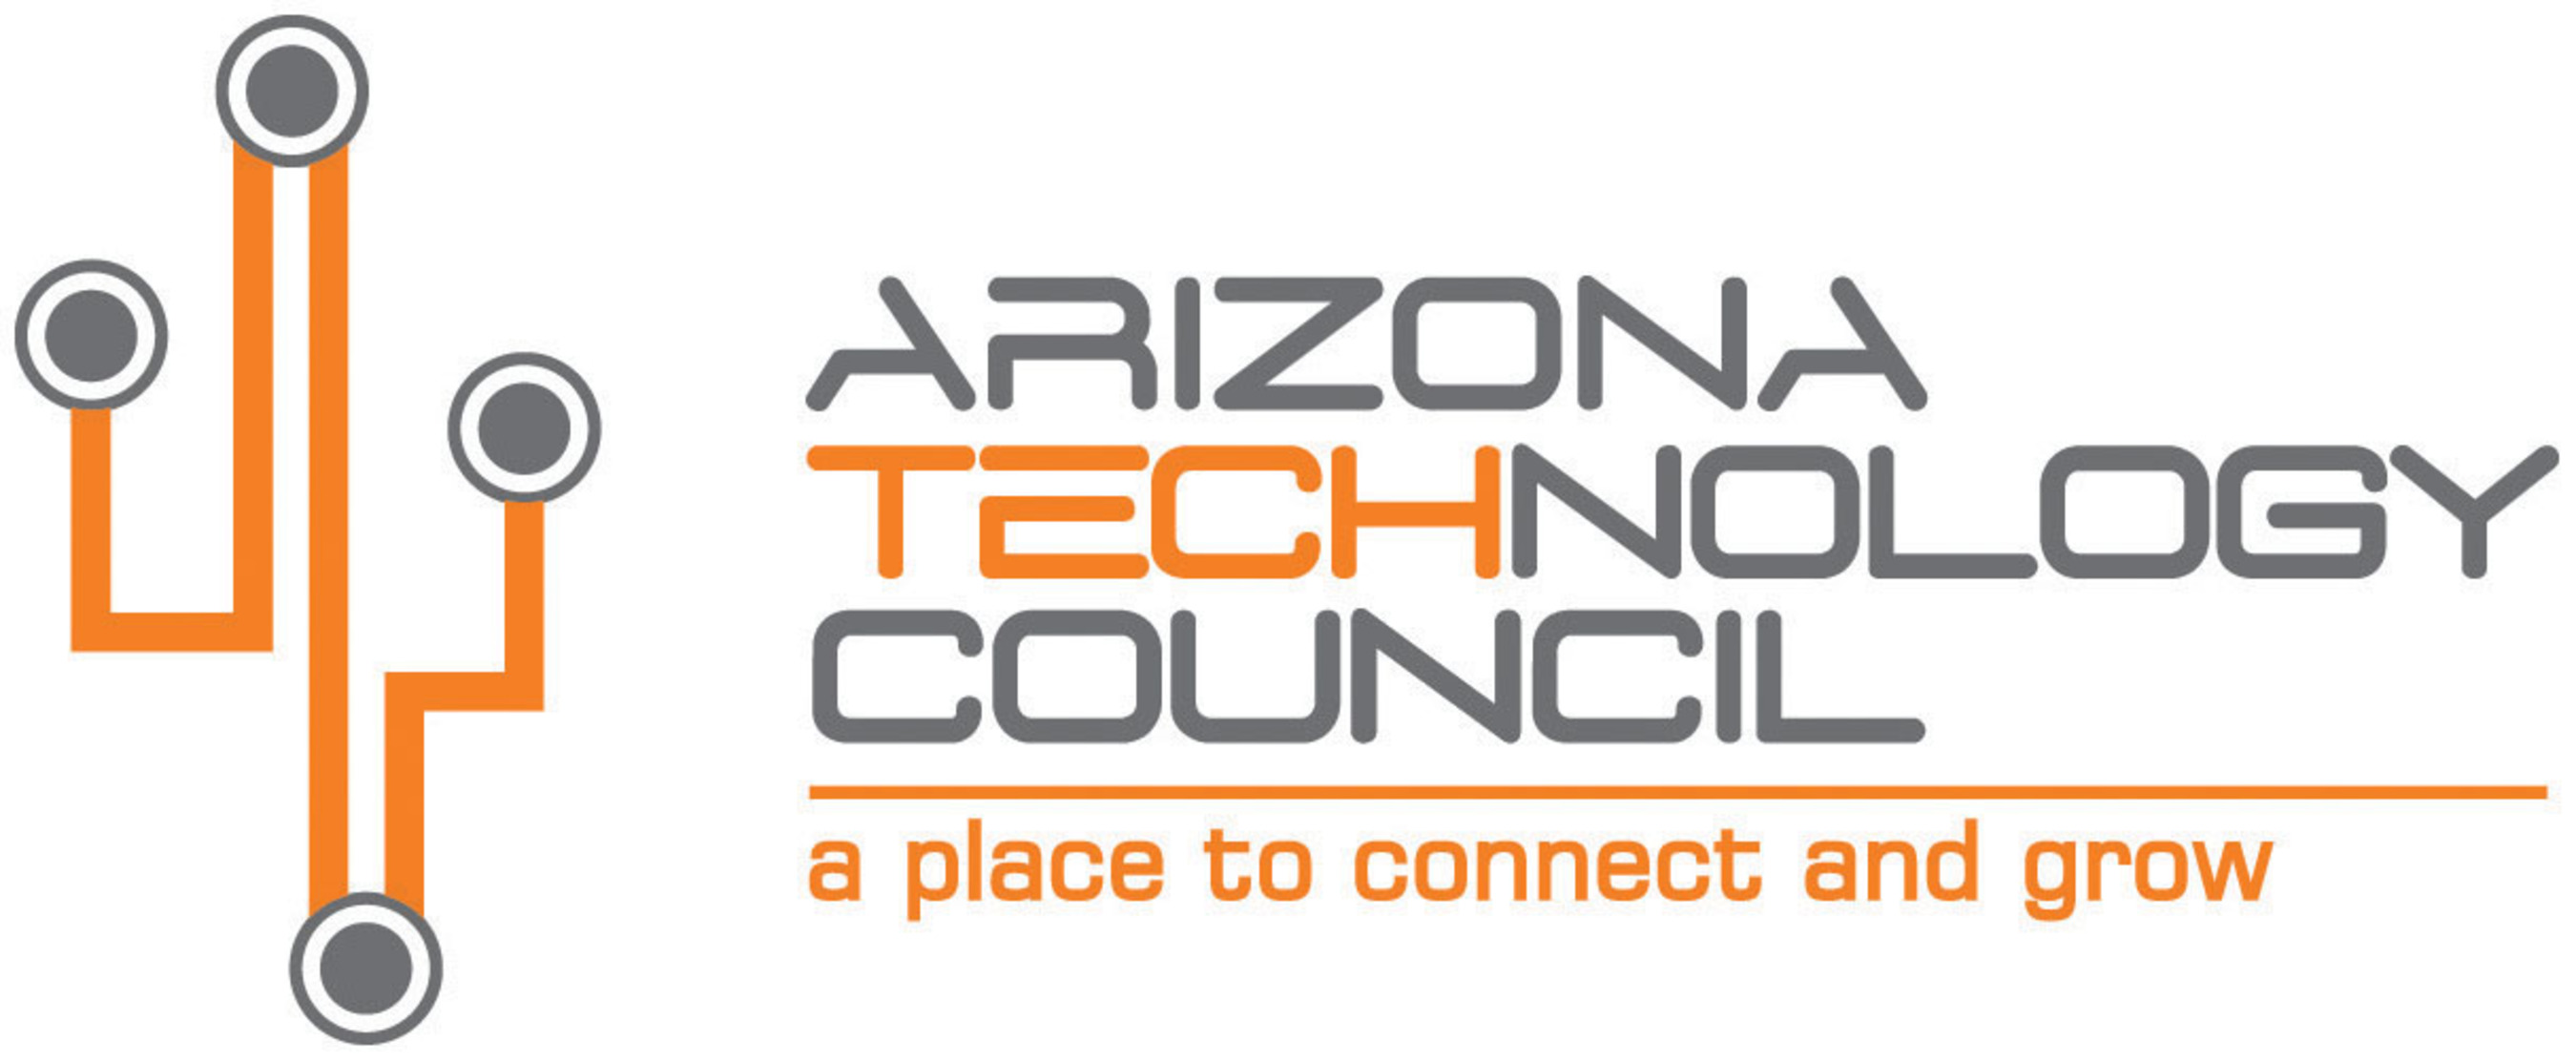 The Arizona Technology Council is Arizona's premier trade association for science and technology companies.